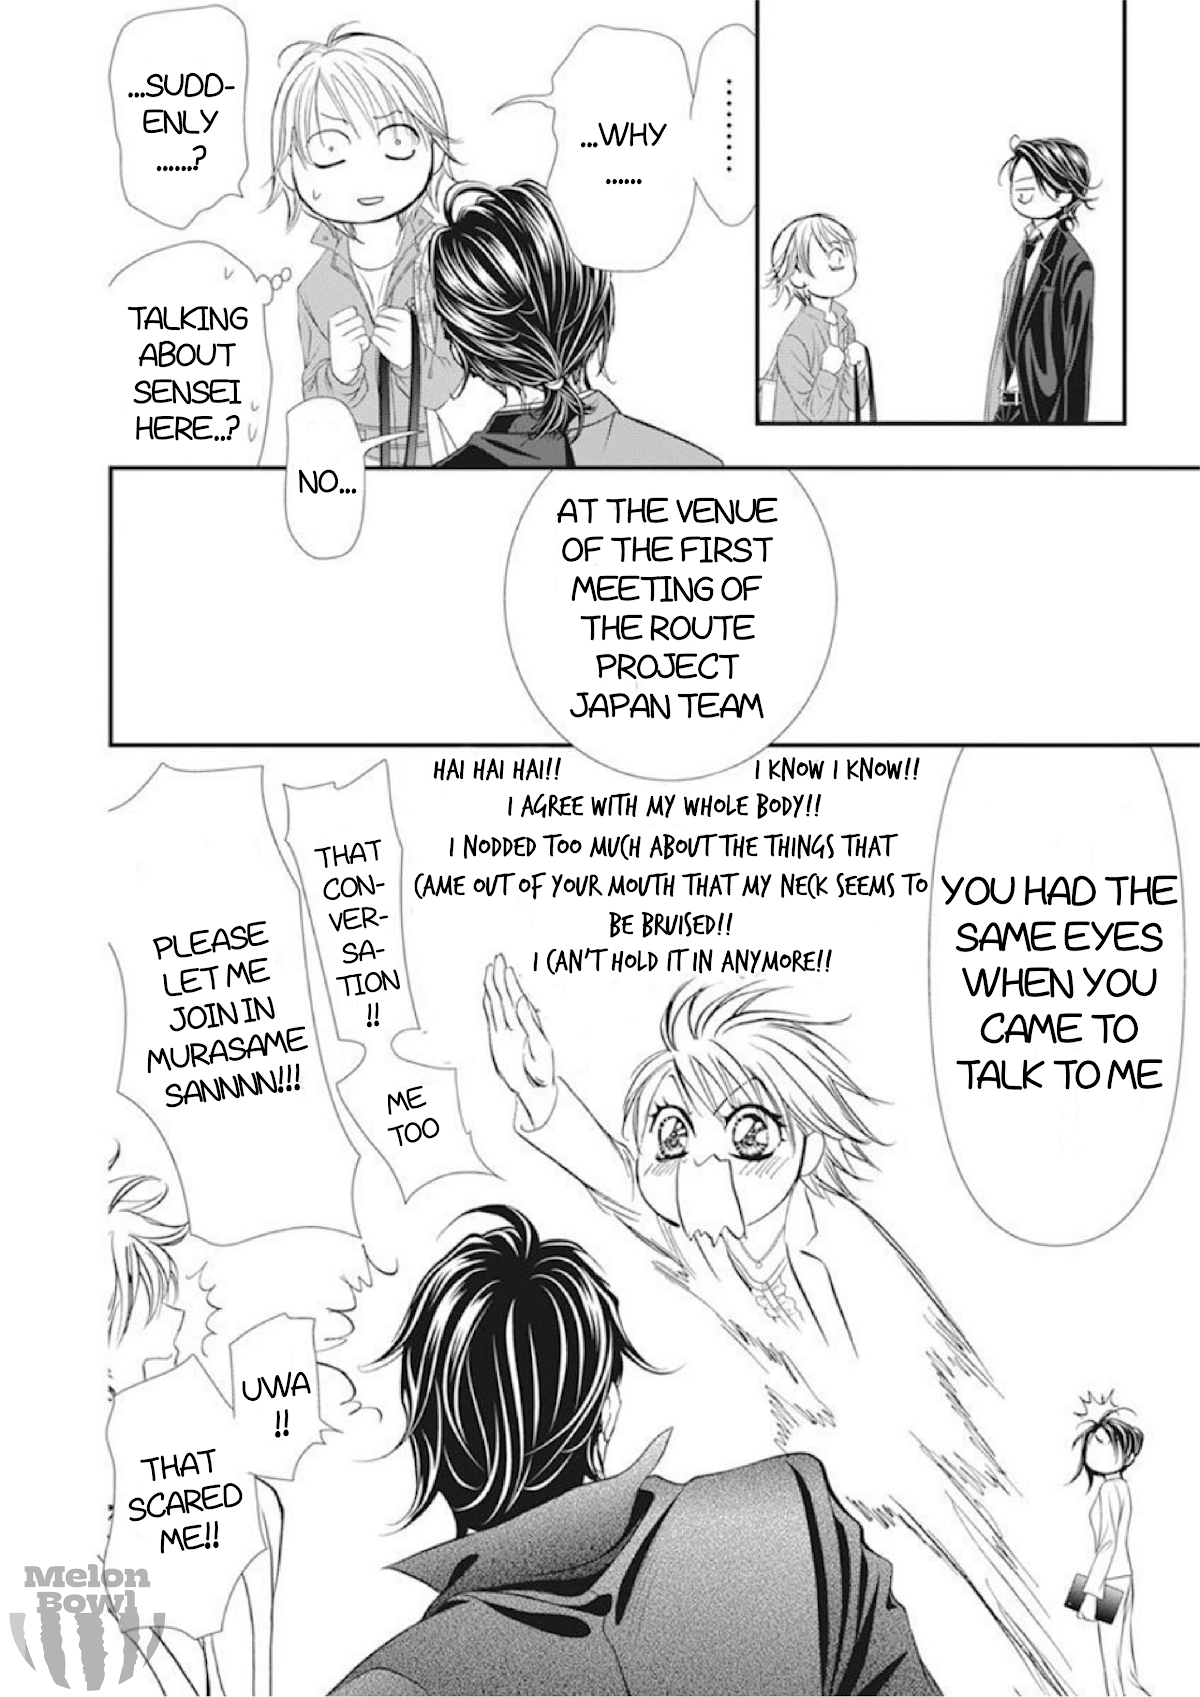 Skip Beat!, Chapter 306 Fairy Tale Dialogue image 09